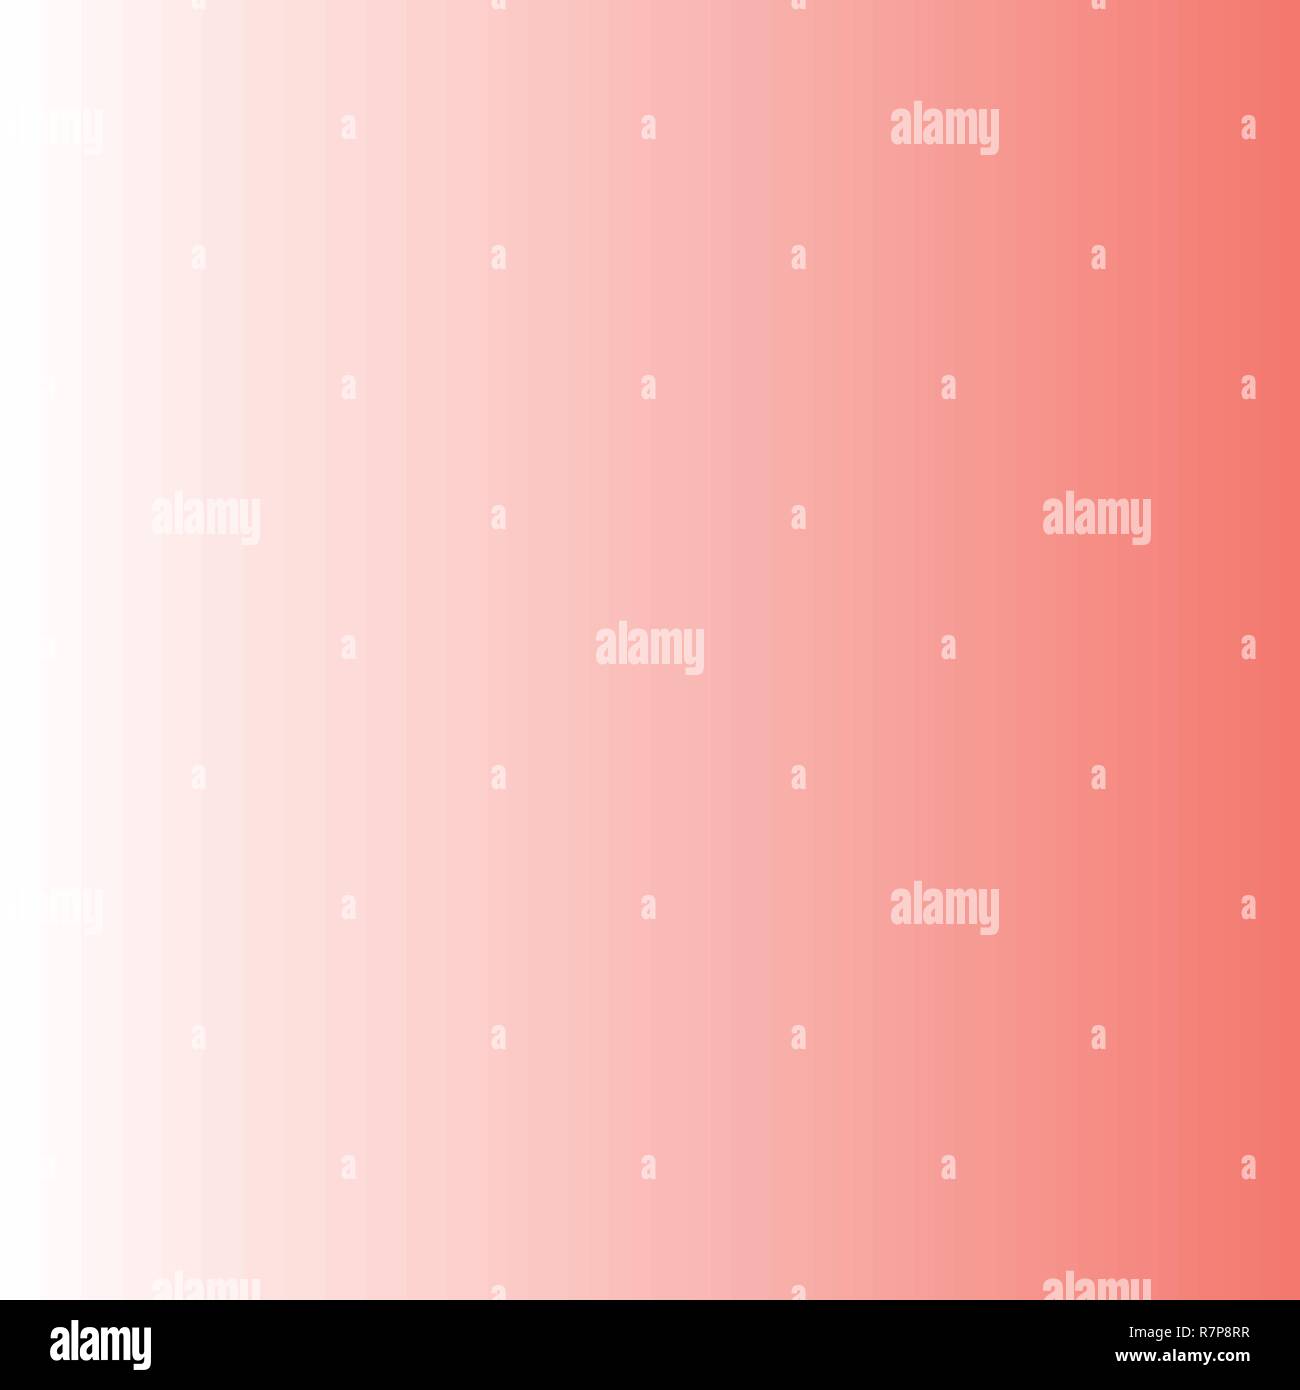 Simple vector gradient from White to Living Coral color. Stock Vector